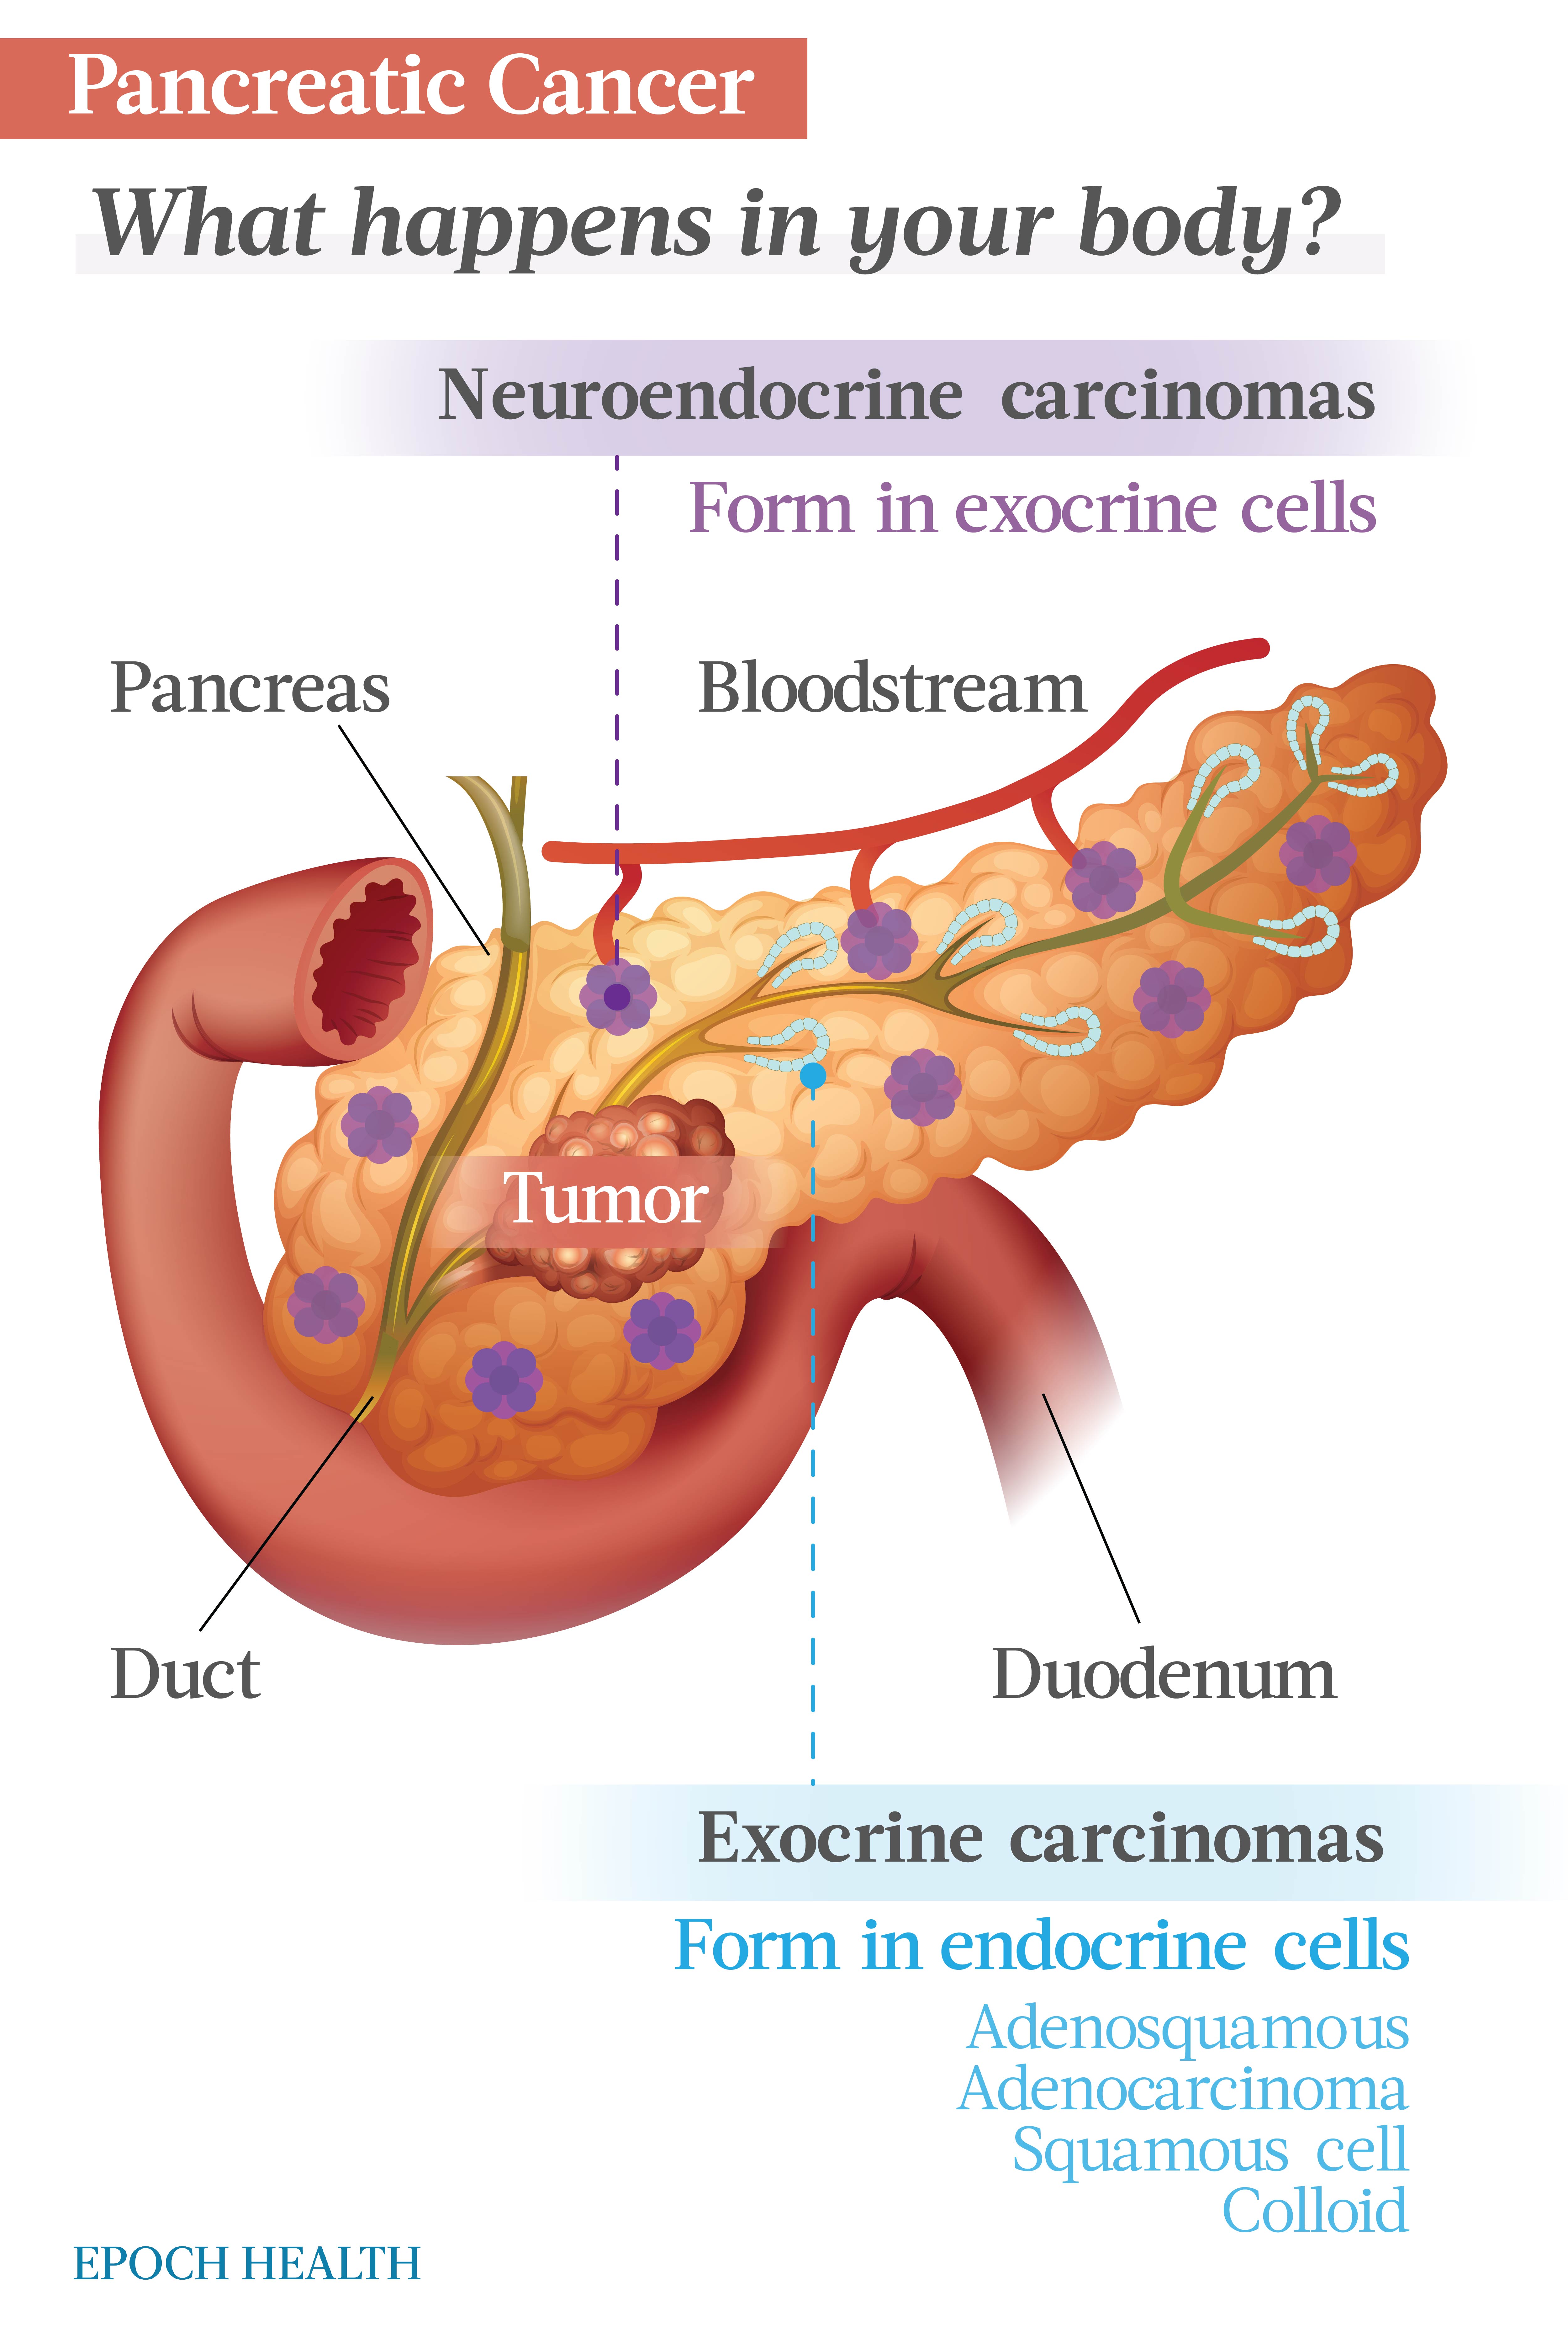 Pancreatic cancer either starts in endocrine or exocrine cells. The most common type is pancreatic adenocarcinoma. (The Epoch Times)